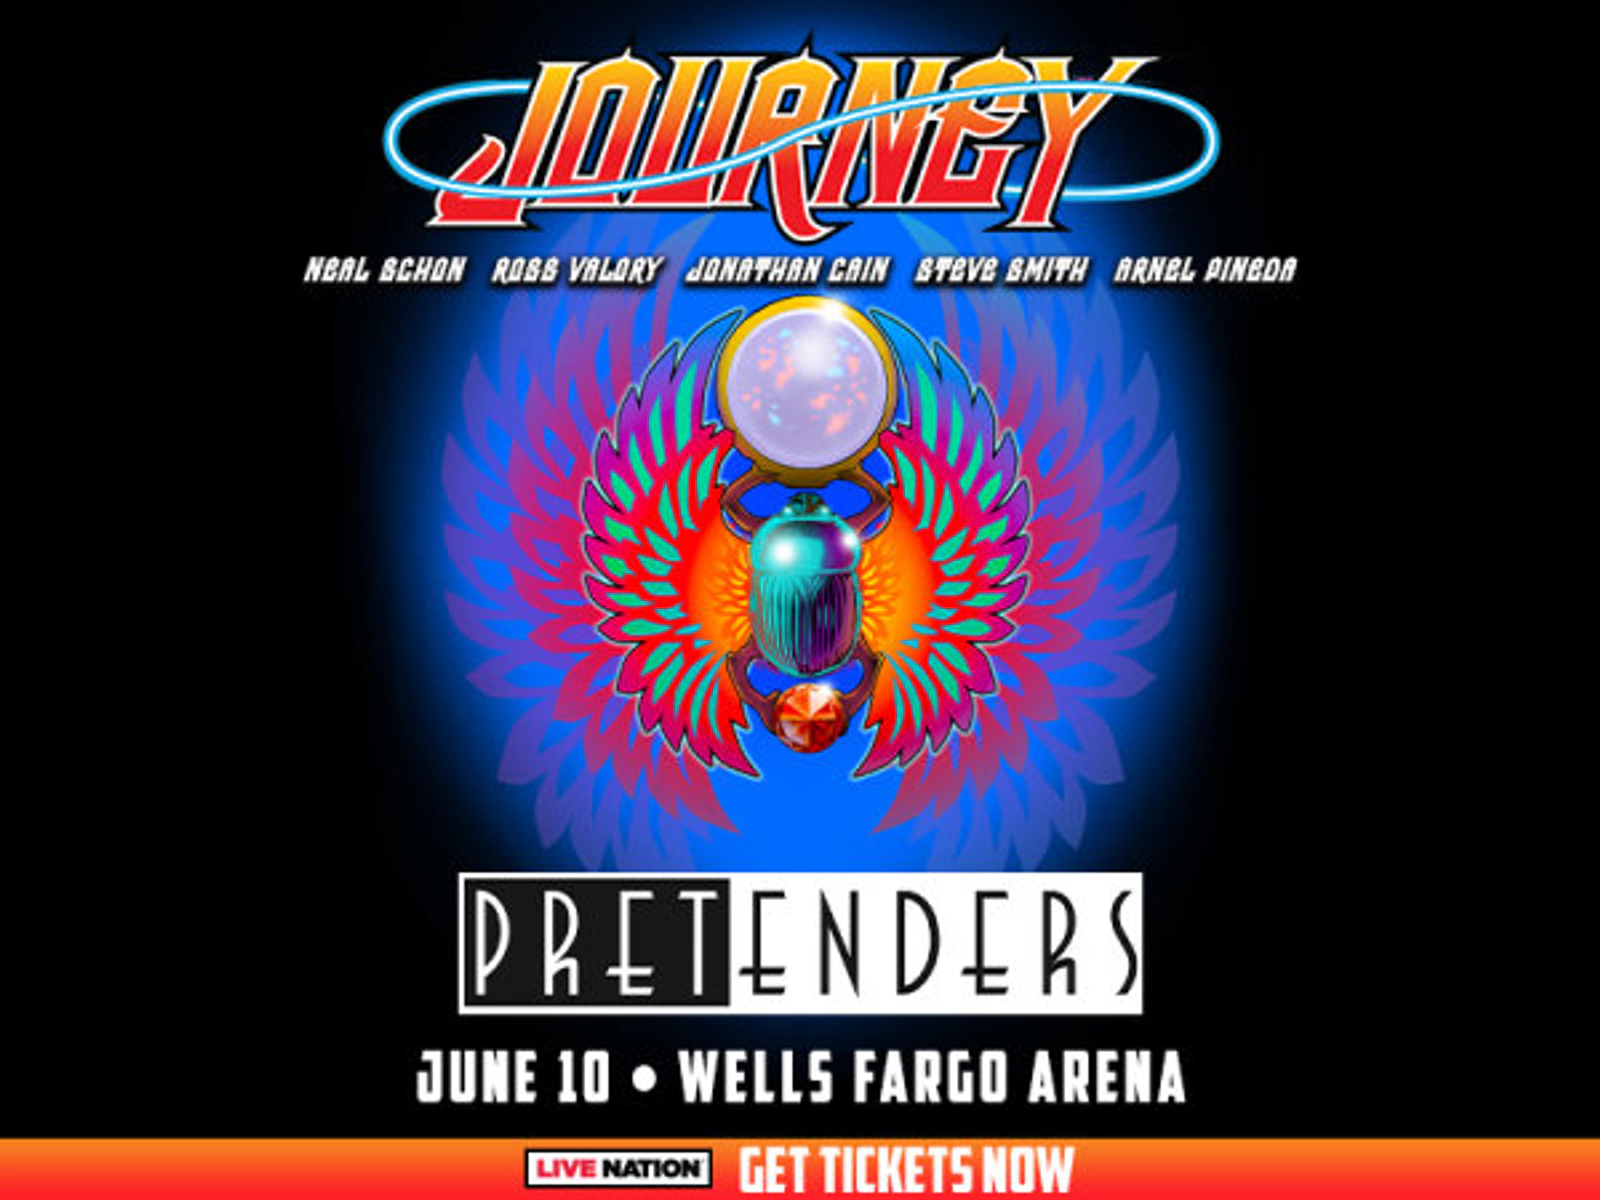 Win Jorney with The Pretenders Tickets in the KXnO Will Call Window! - Thumbnail Image